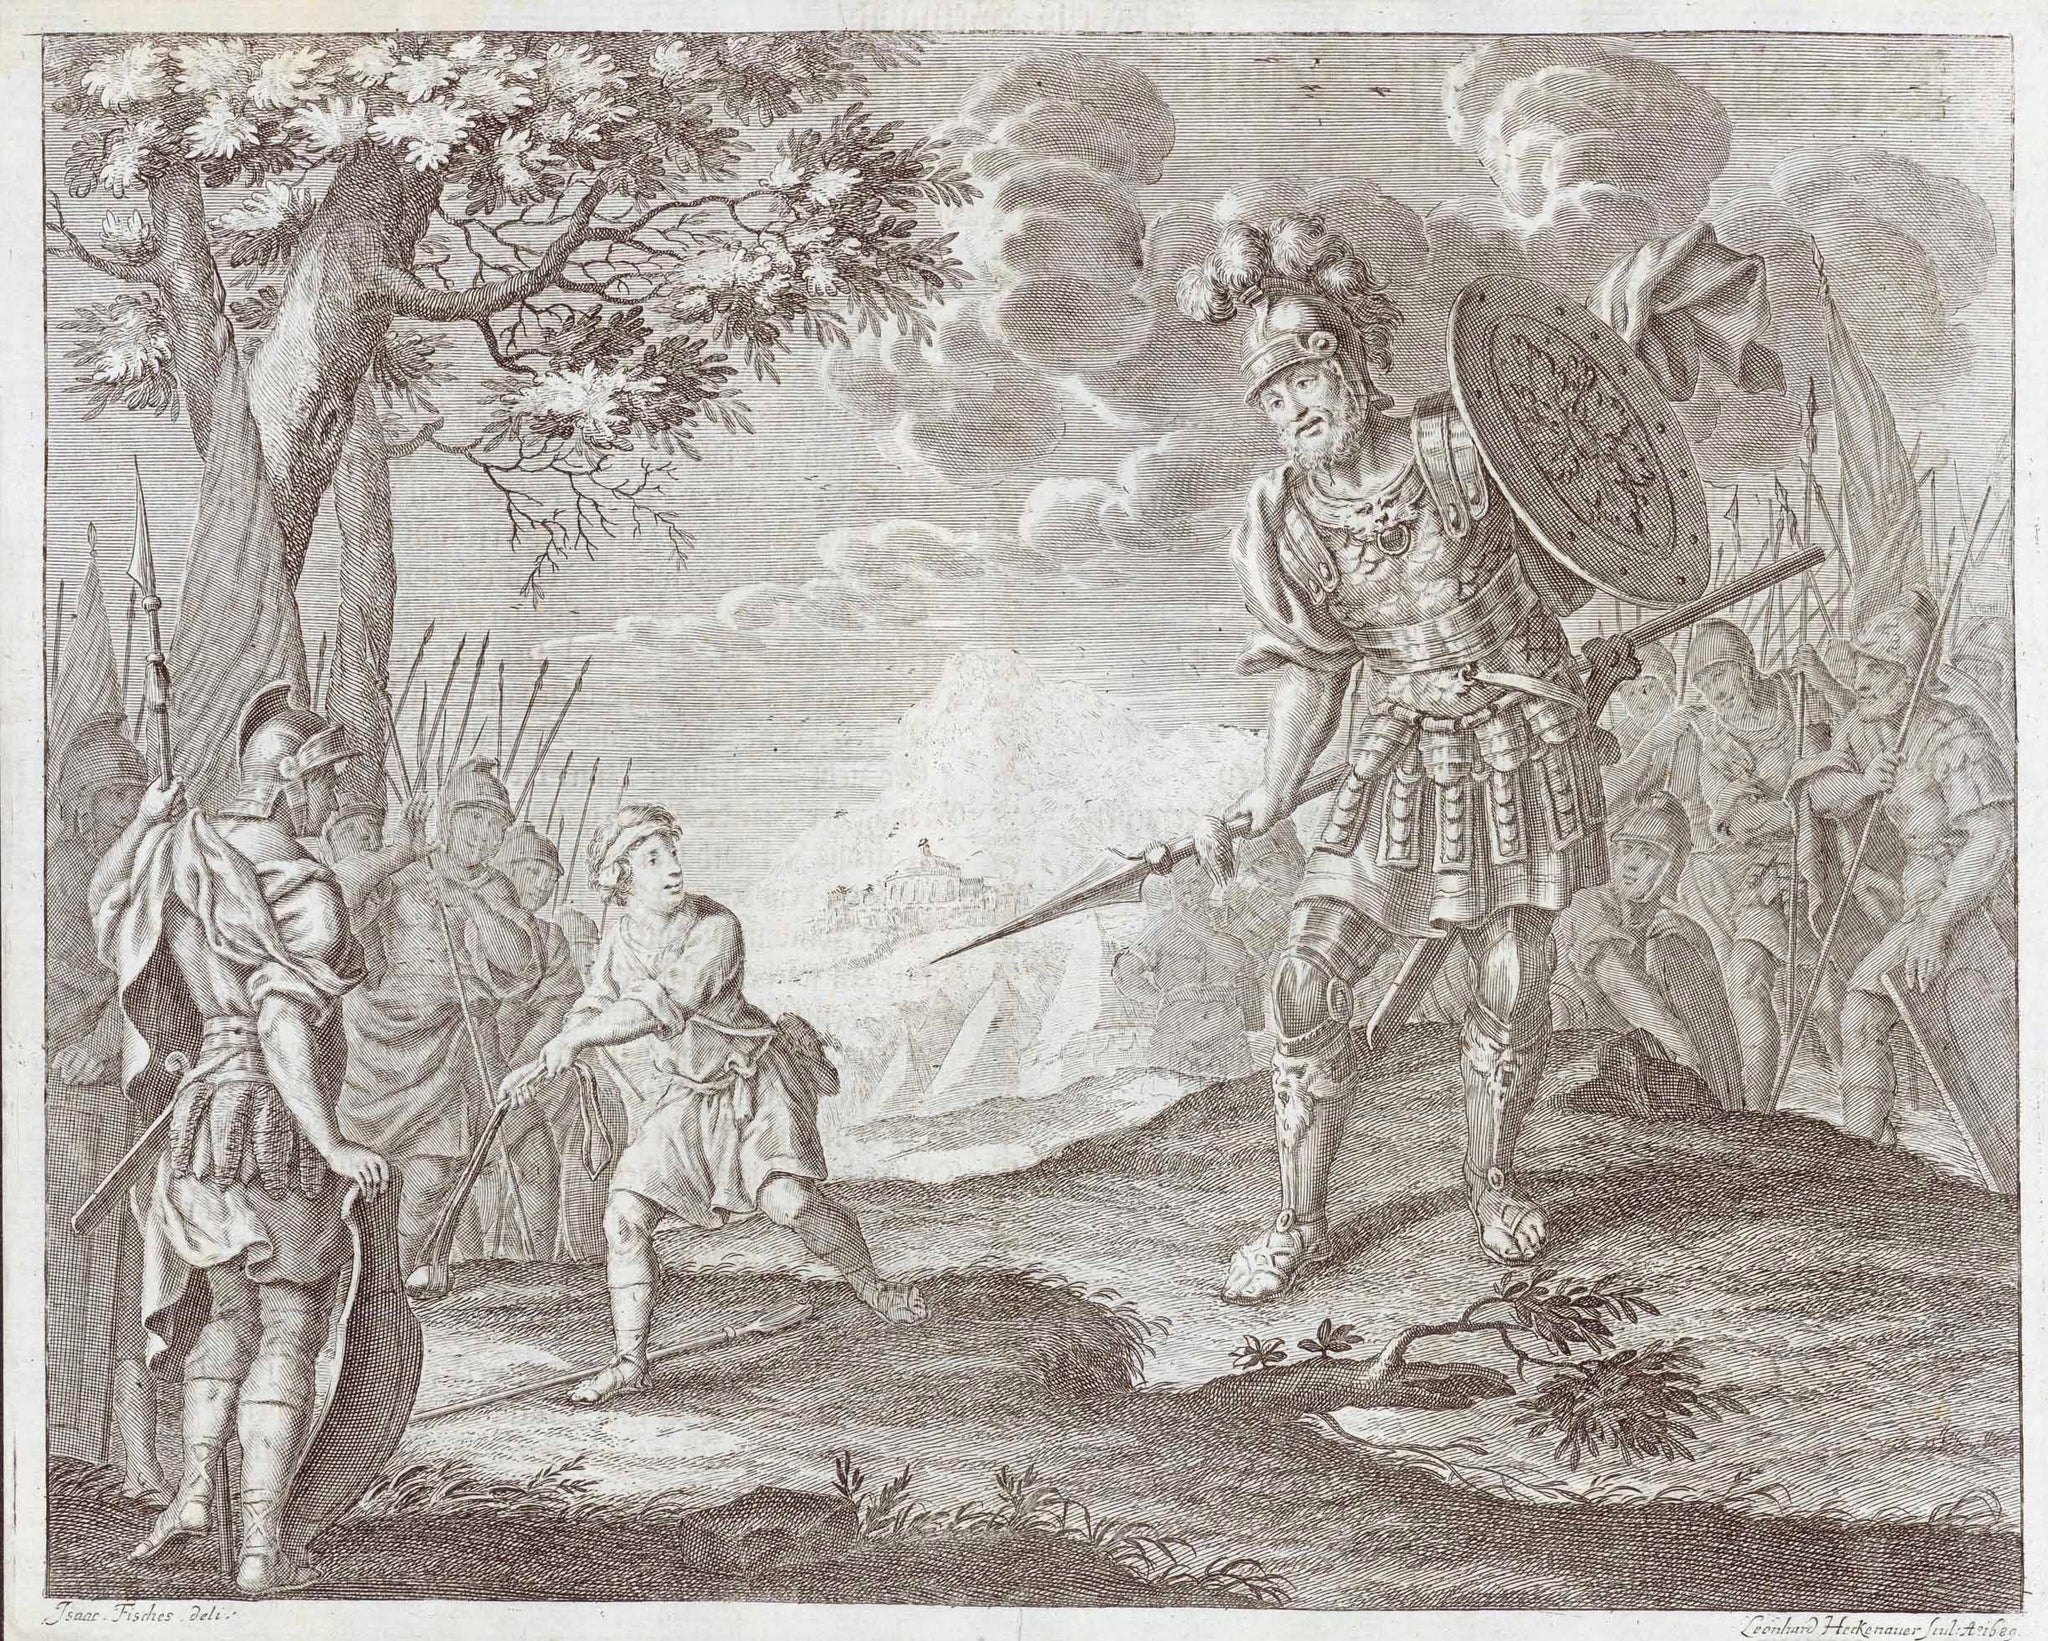 David and Goliath. - No title.  David is getting ready to charge the famous stone with a sling against Goliath who was physically way superior to David.  Copper engraving by Leonhard Heckenauer (1655-1704) after the drawing by Isaac Fisches (1638-1706)  This engraving was published in "Friedensgemaelde - Der Evangelischen Schuljugend in Augsburg"  Augsburg, 1731  Original antique print  